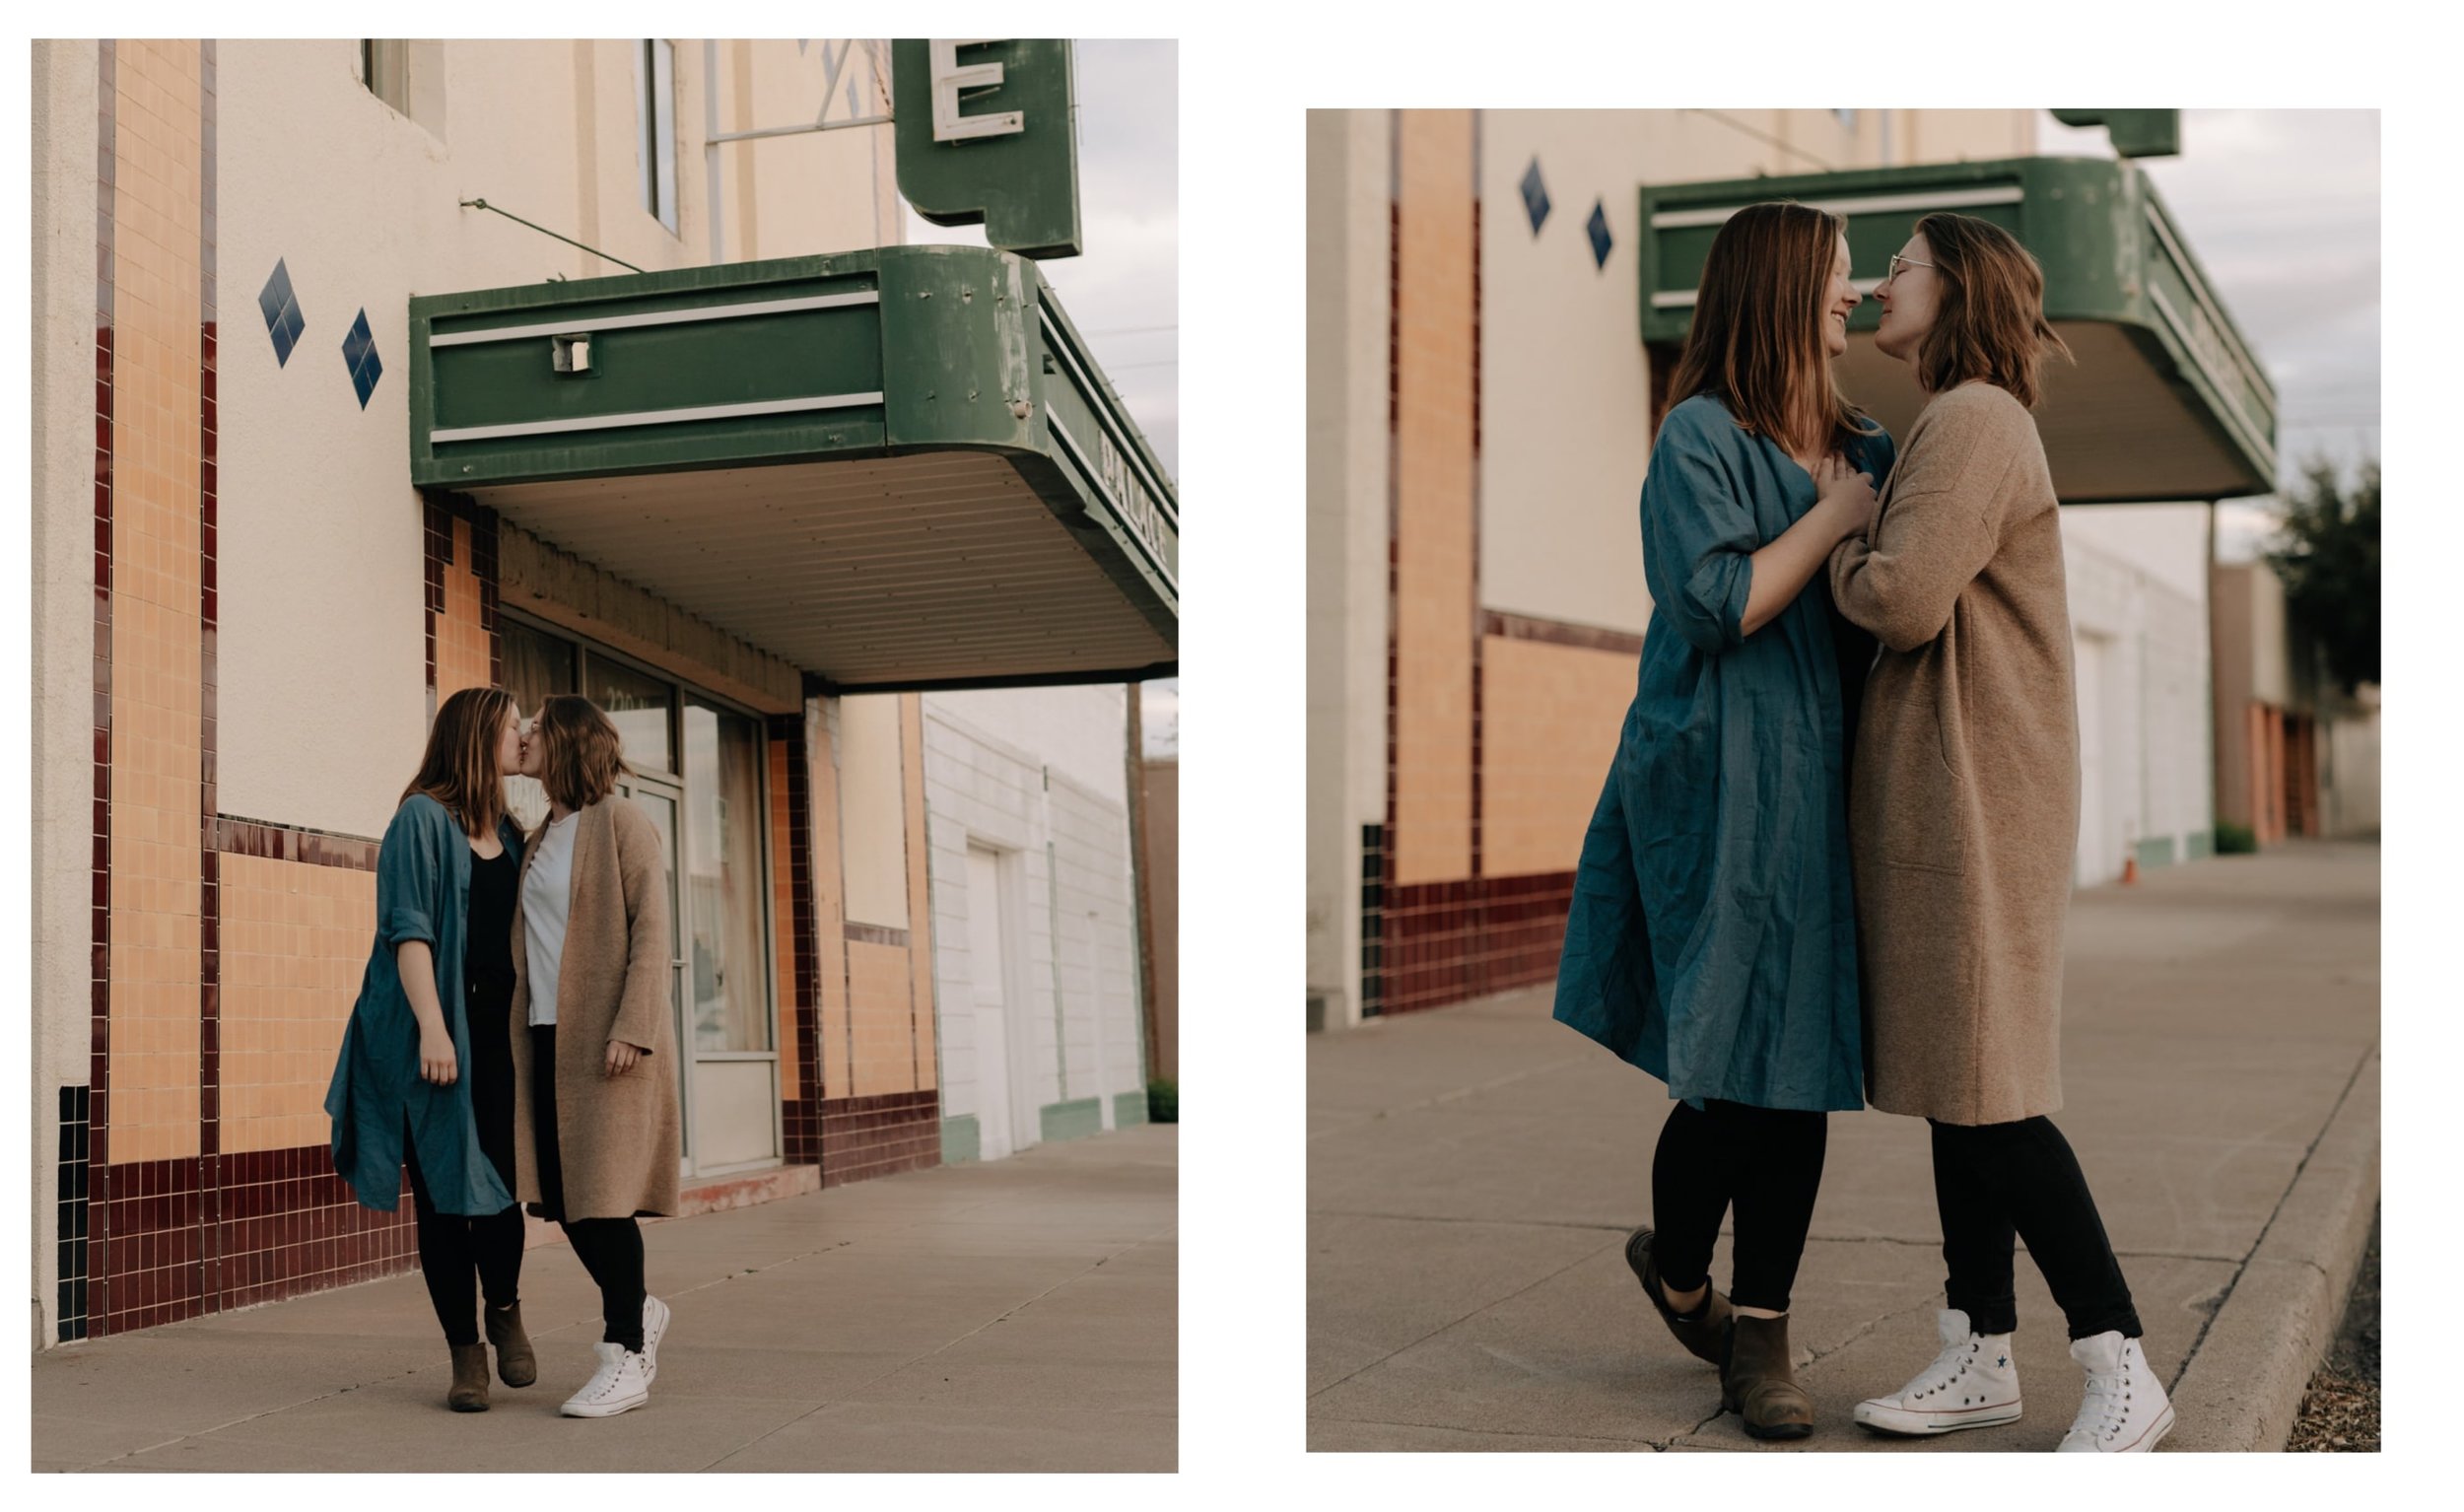 A couple wearing casual outfits and long cardigans kiss on the streets in Marfa, Texas.